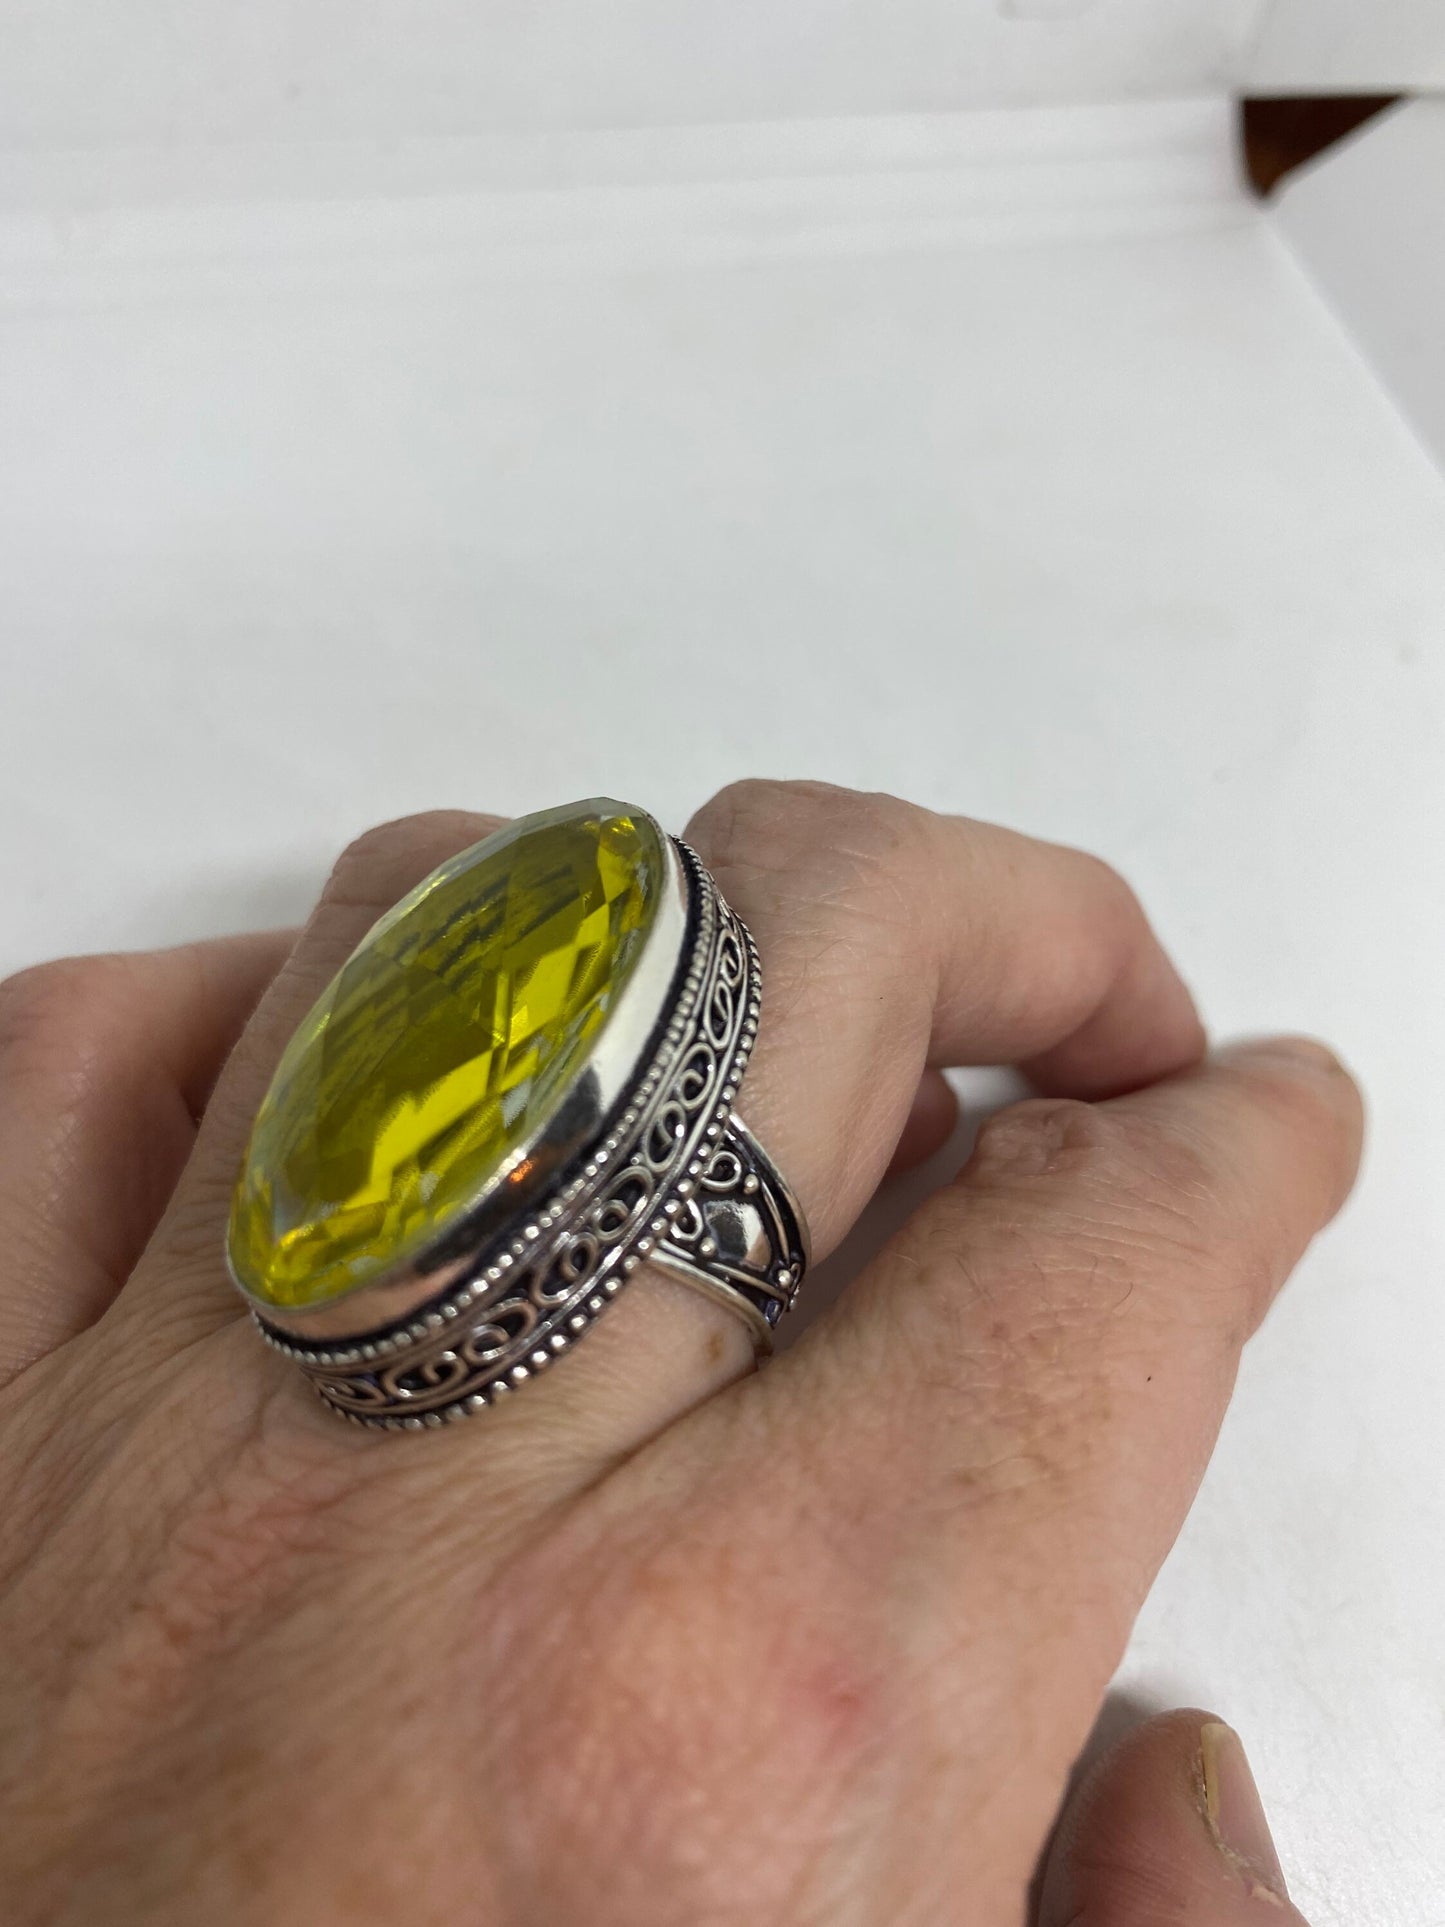 Vintage Yellow Vintage Art Glass Cocktail Ring Size 7